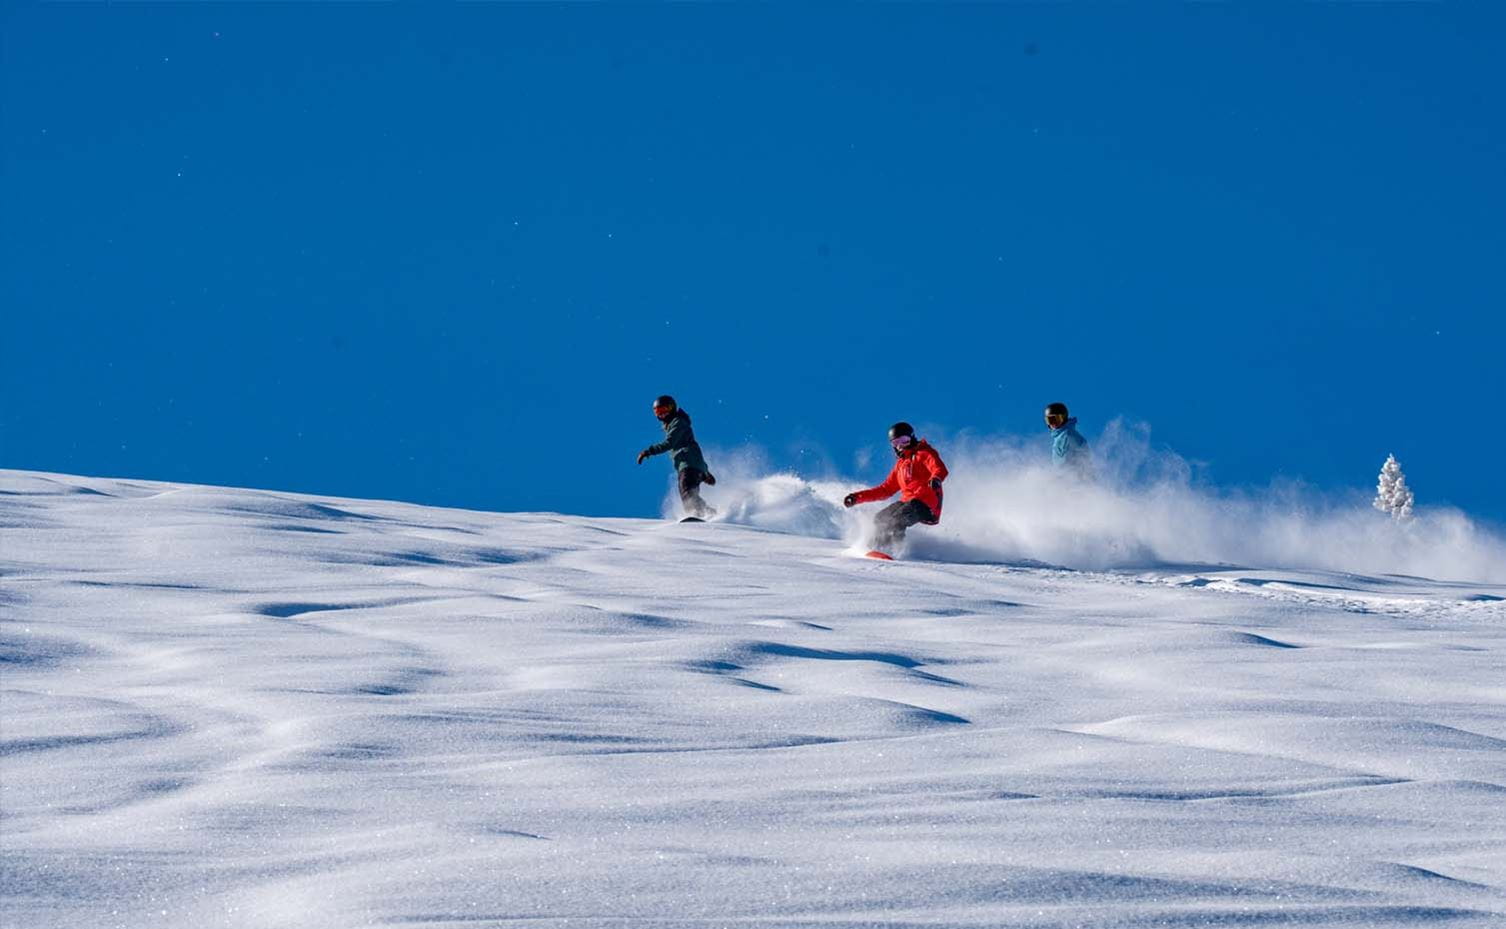 a group of people skiing down a snowy hill